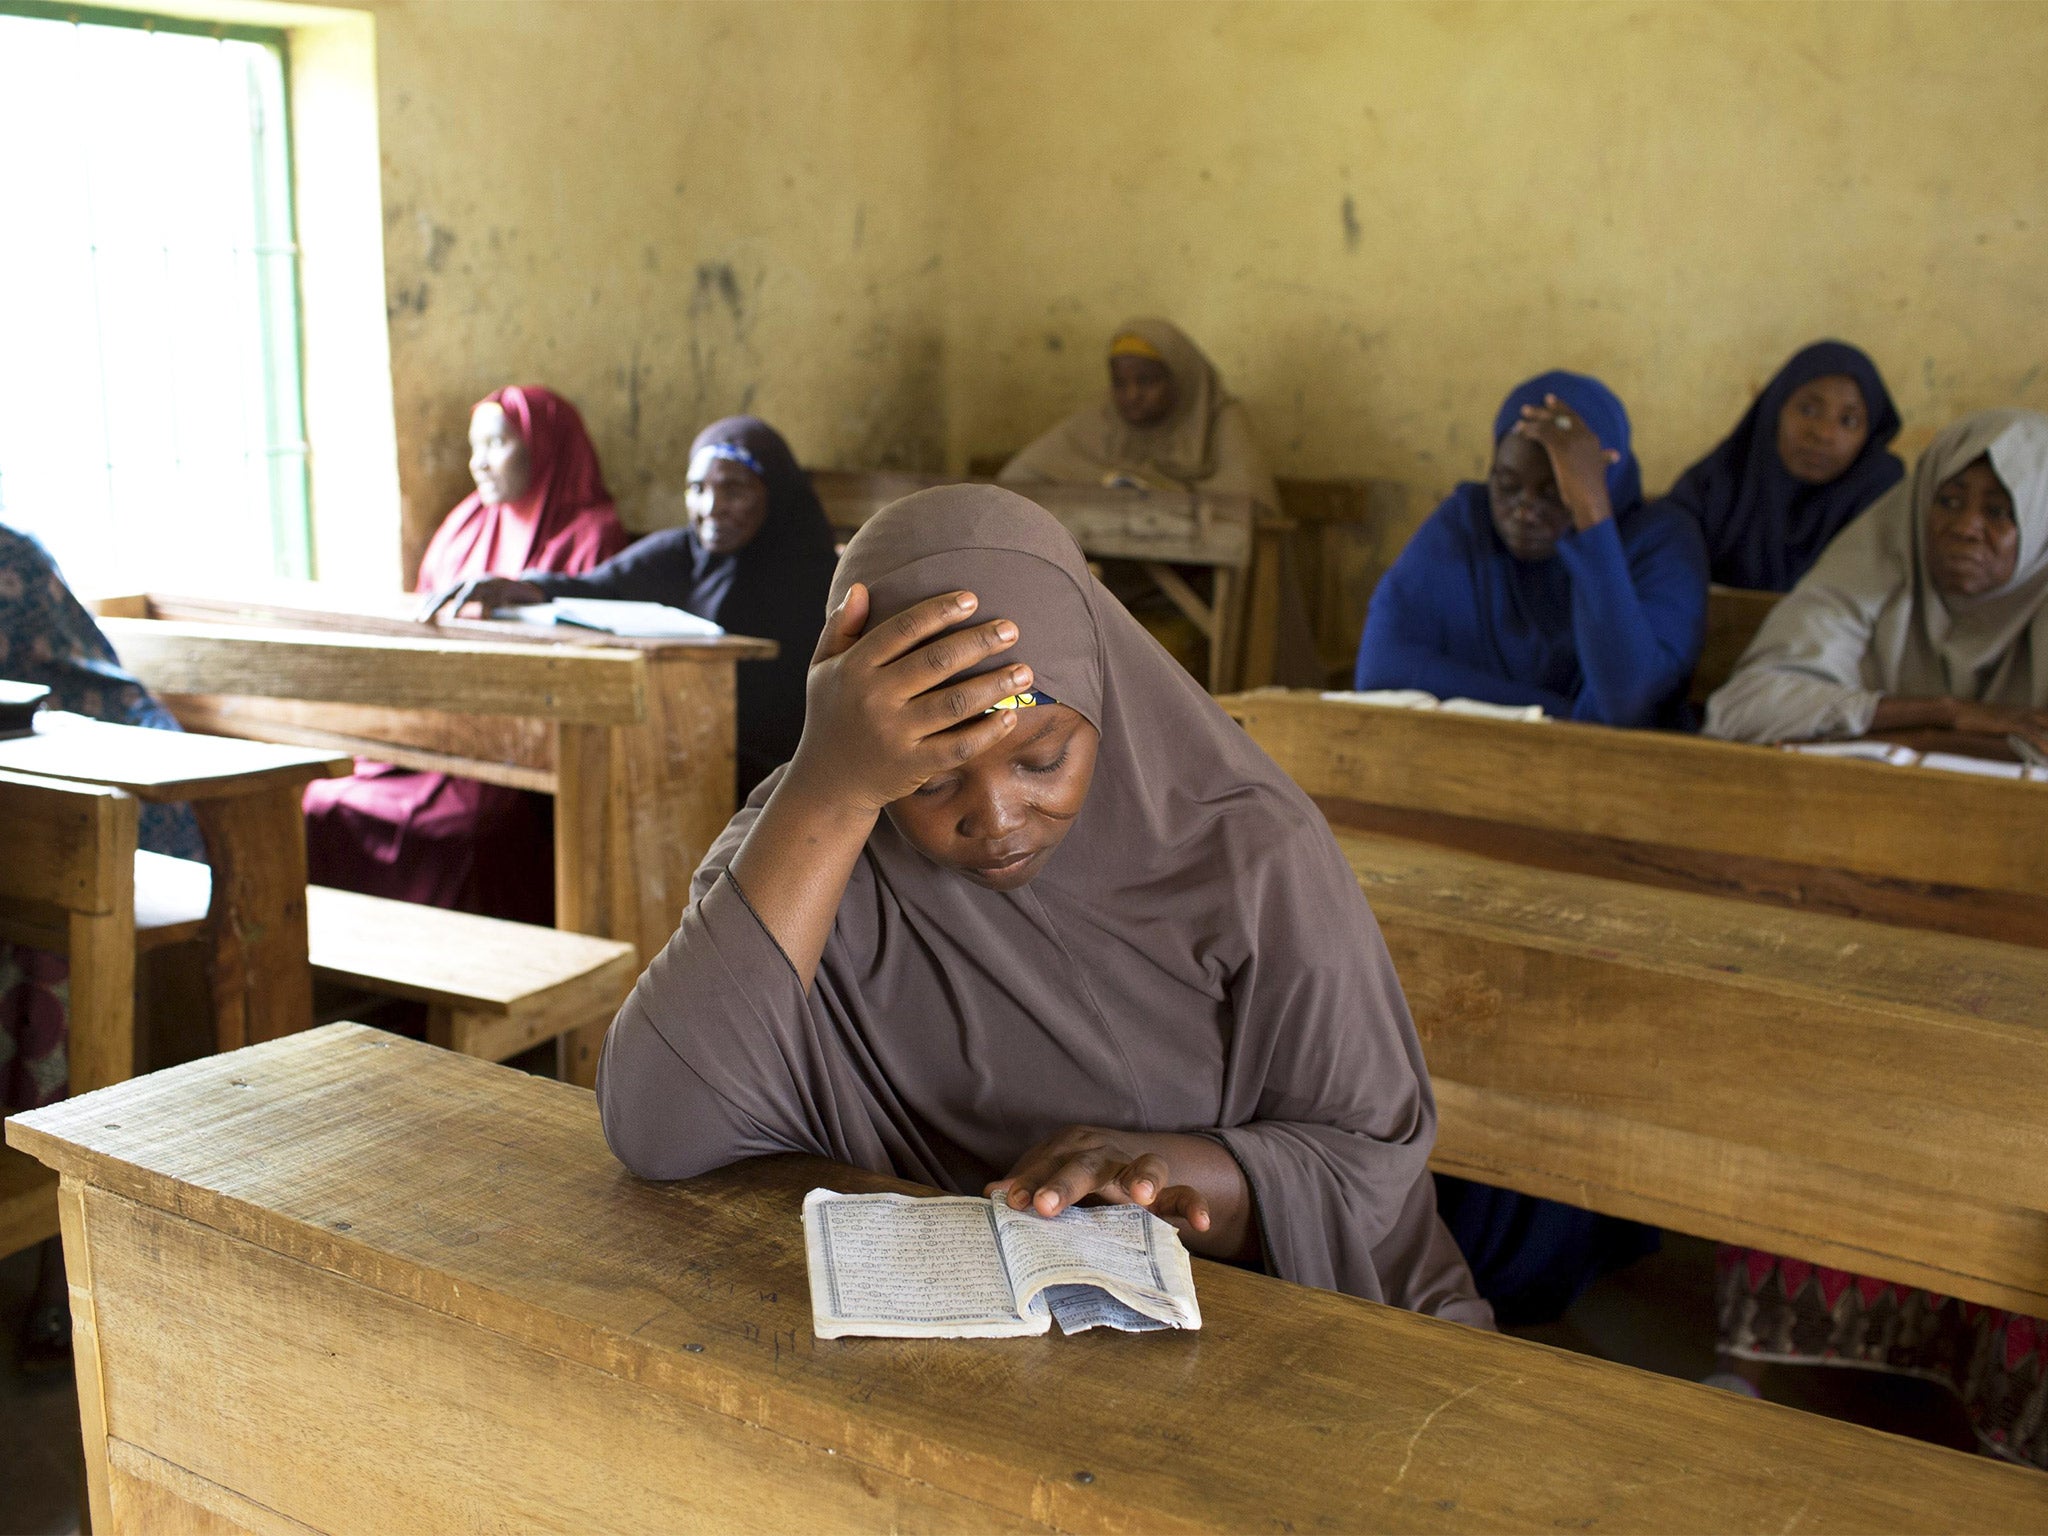 Terrorist Seducing School Girls Tube Videos - Nigeria fights back against Boko Haram's radical Islam through the power of  learning | The Independent | The Independent